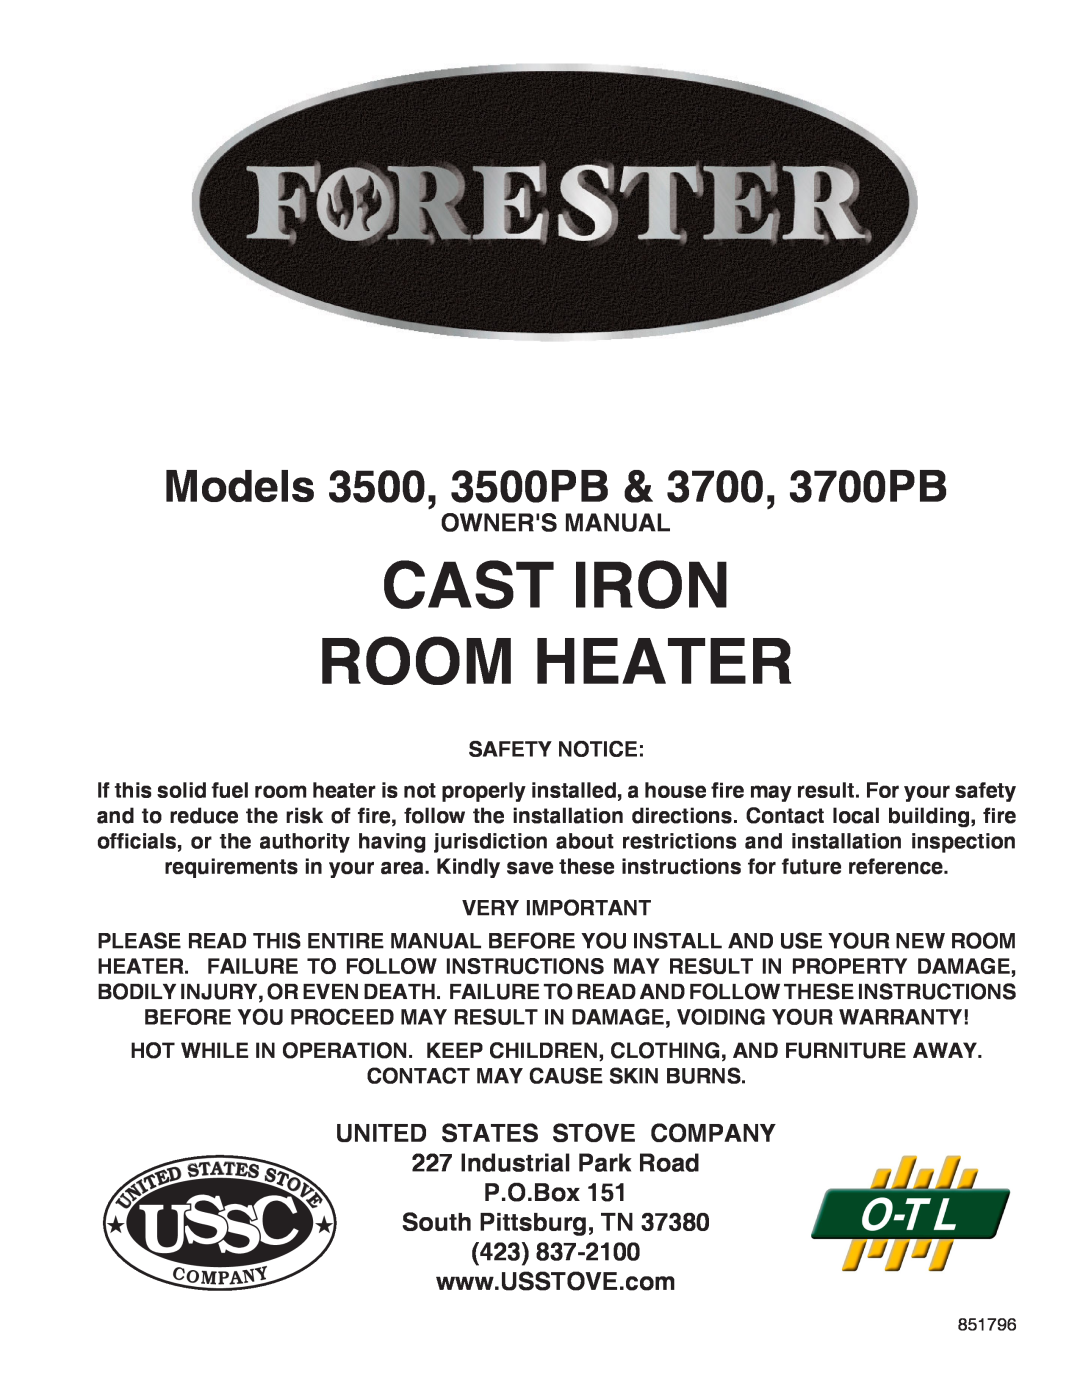 United States Stove owner manual Cast Iron Room Heater, Ussc, Models 3500, 3500PB & 3700, 3700PB 